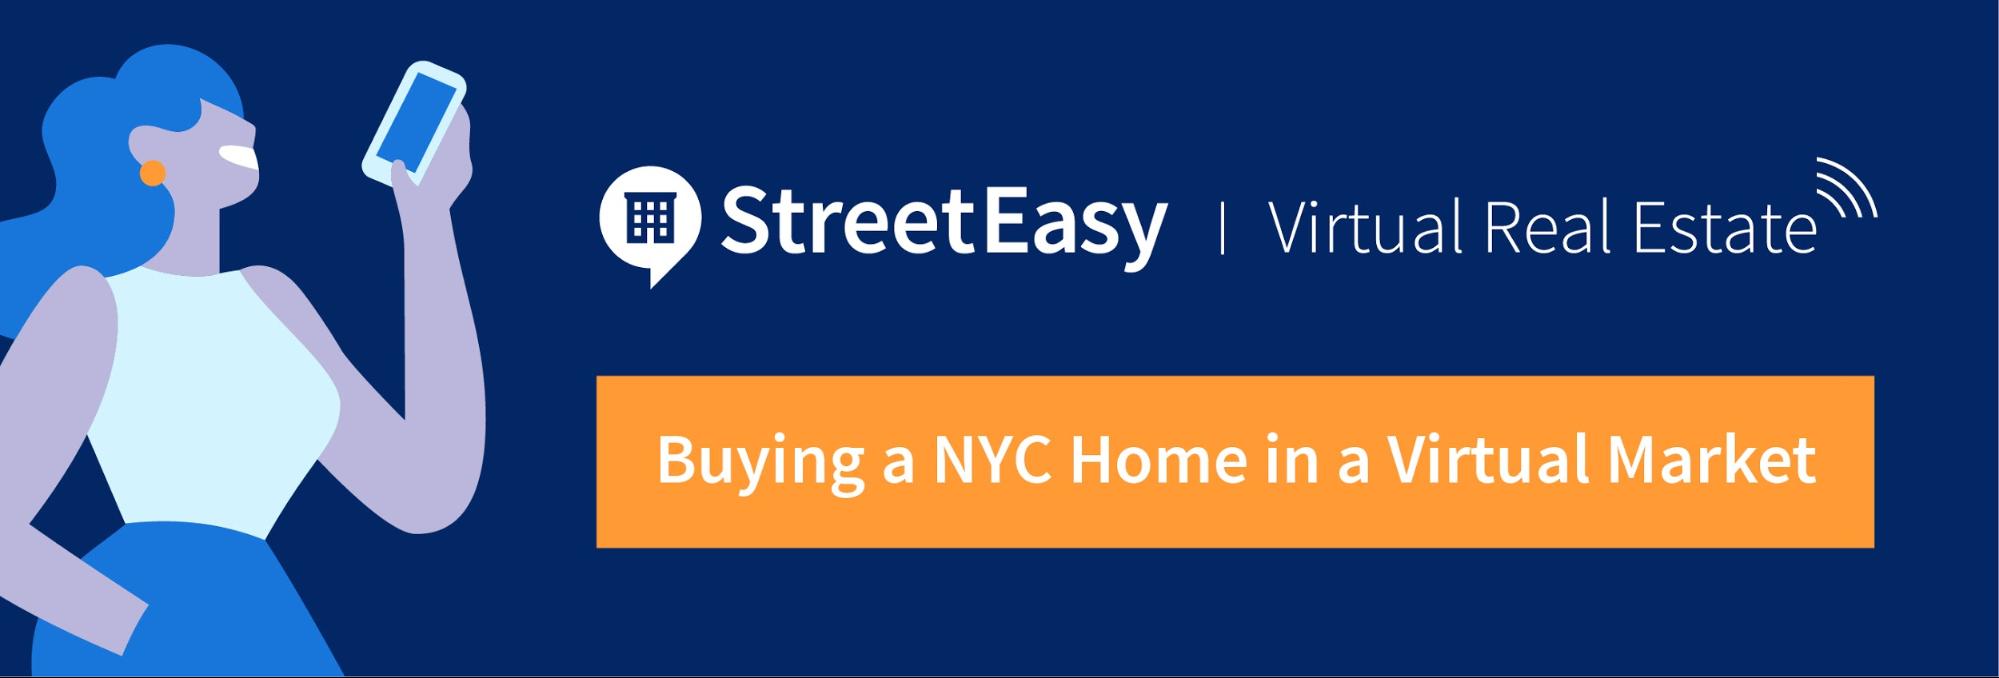 image of buying a nyc home in a virtual market banner ad